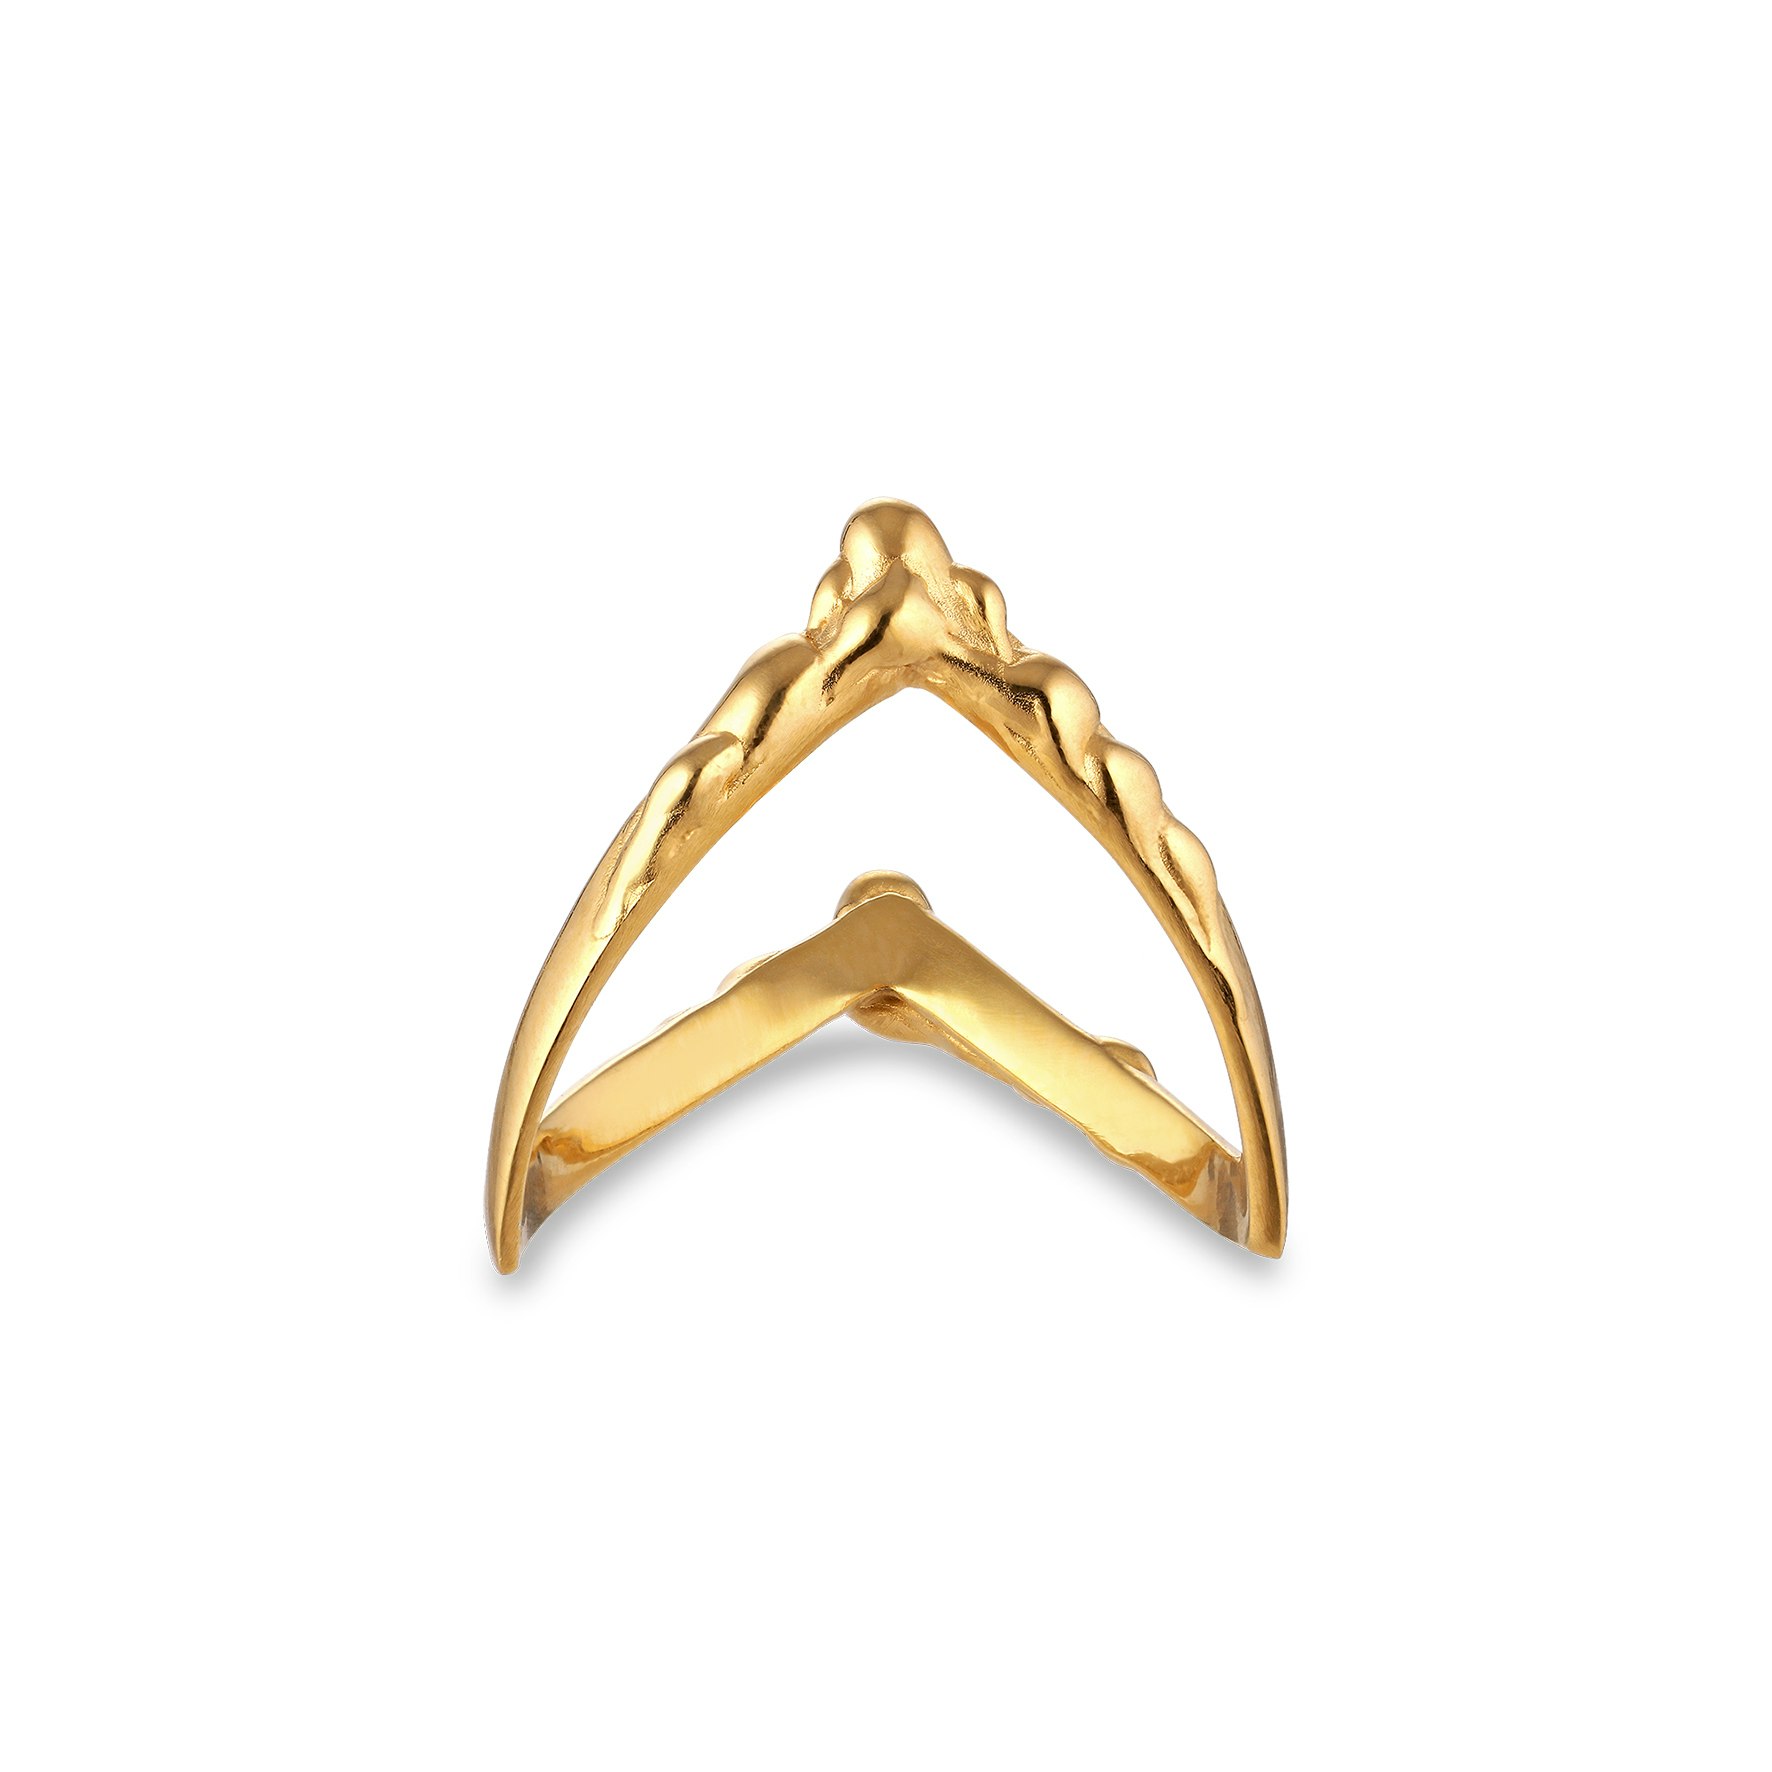 Drippy V-Ring from Jane Kønig in Goldplated-Silver Sterling 925